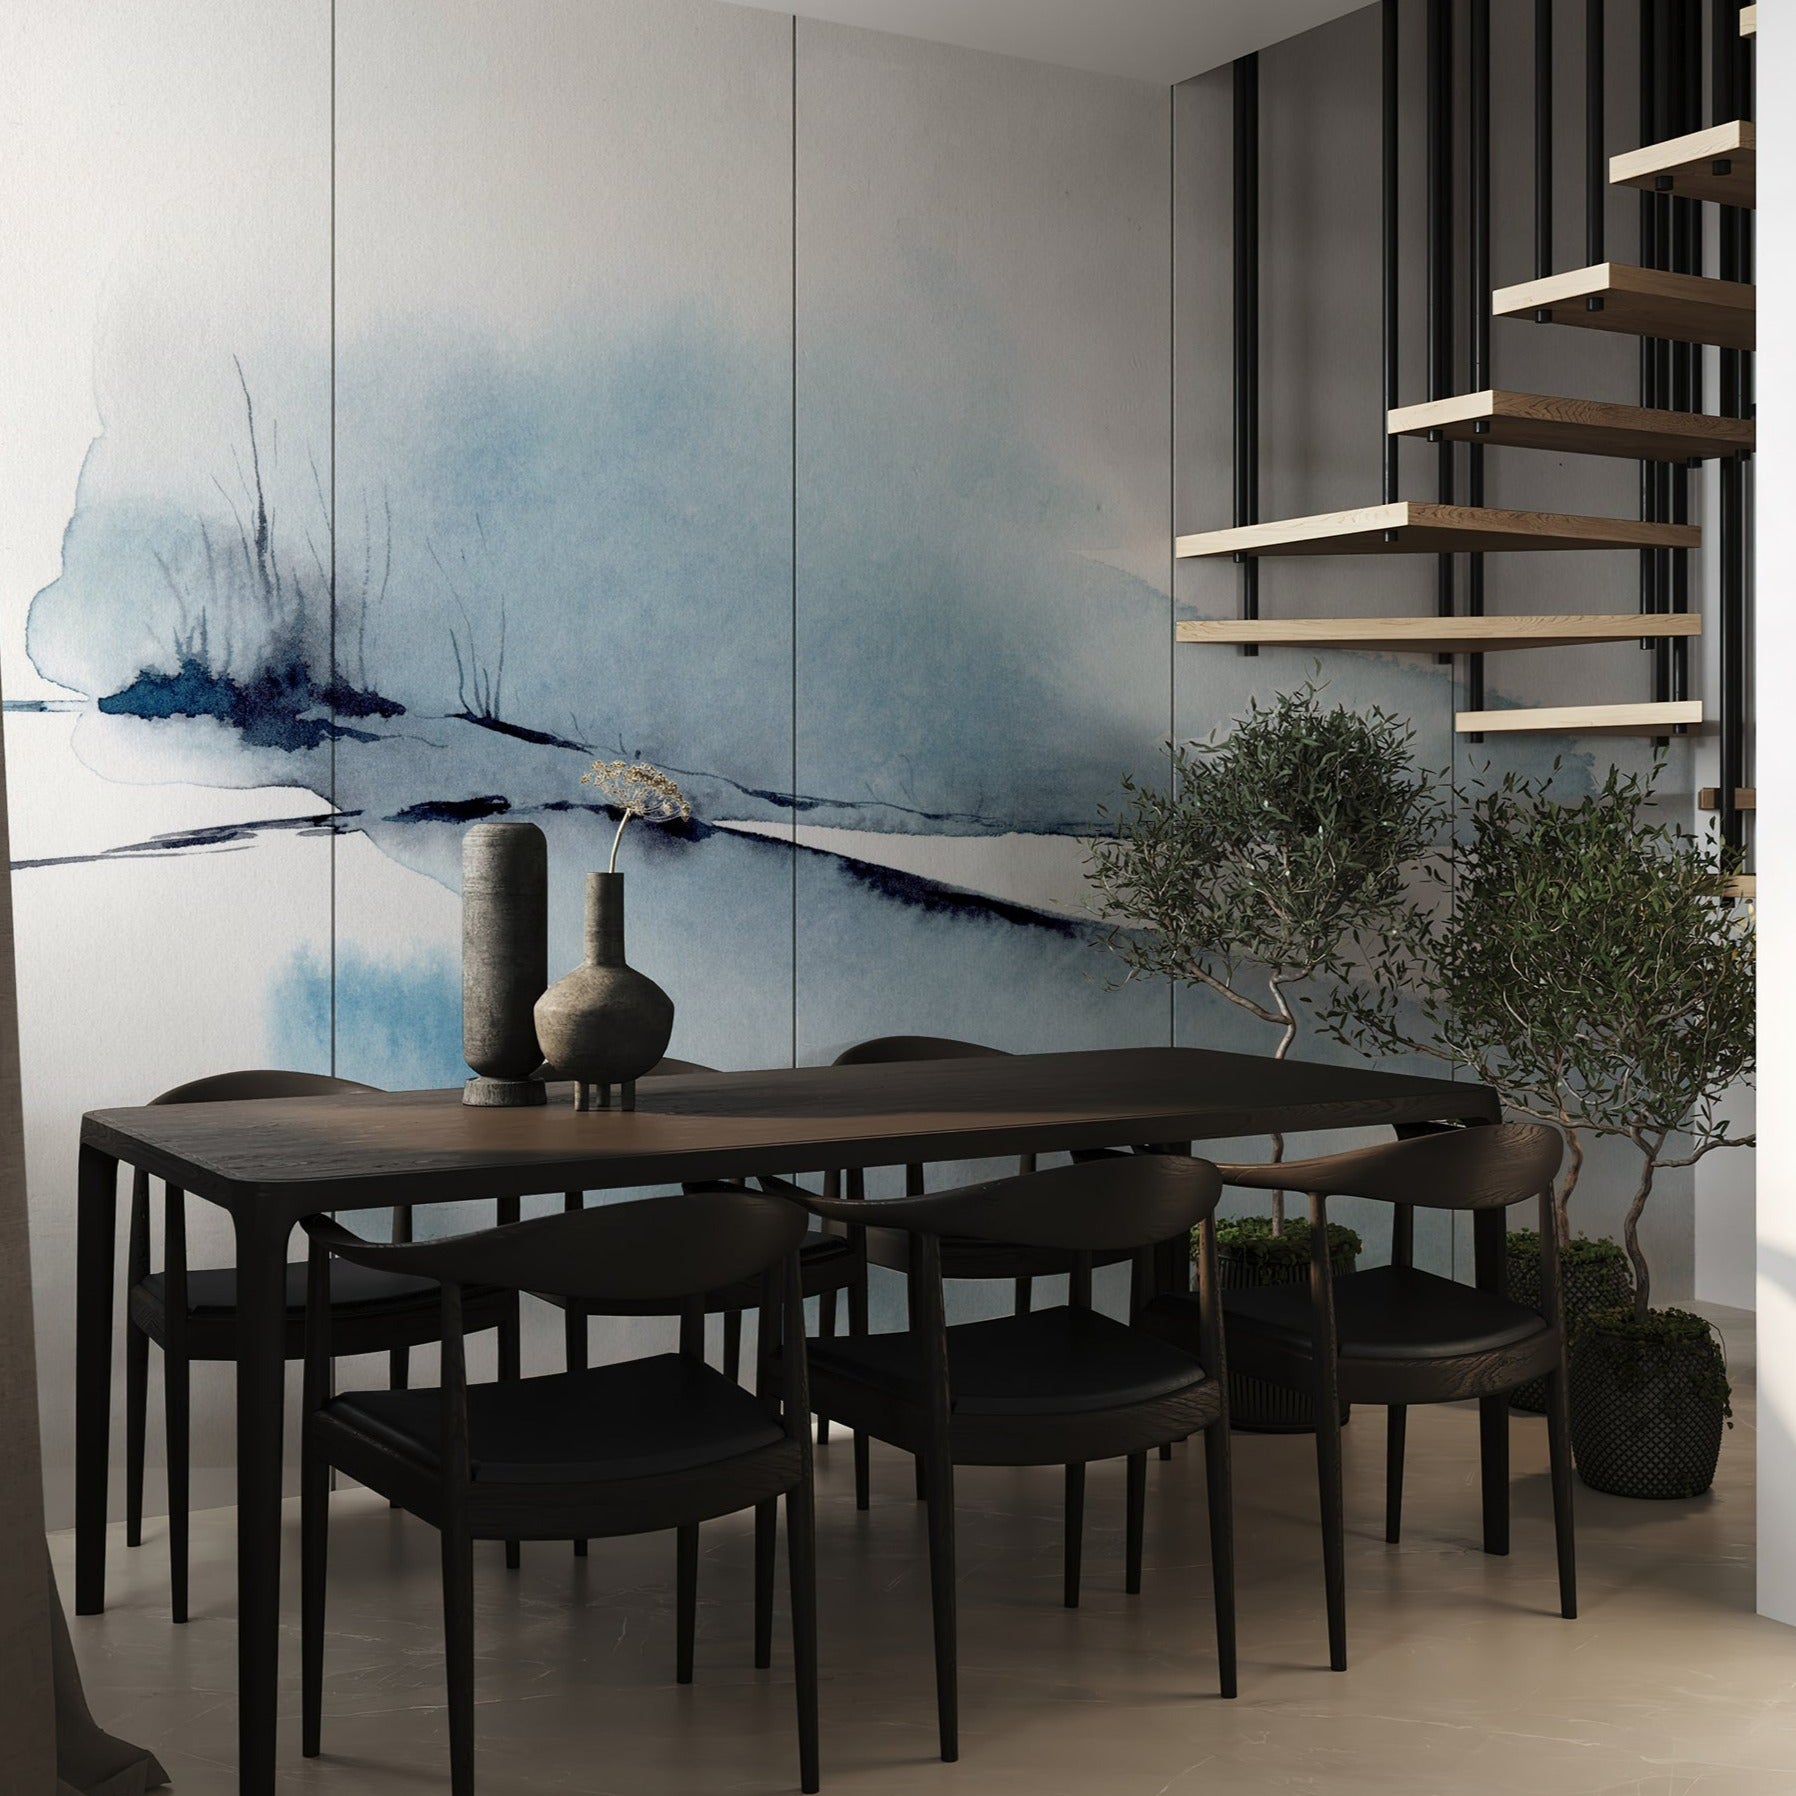 An elegant dining room features the "Atmospheric Sky" wall mural, depicting a tranquil watercolor scene with flowing blue tones and subtle black accents. The artwork extends the entire wall, providing a dramatic backdrop to the modern dark wood dining table and chairs, enhancing the contemporary aesthetic of the space.